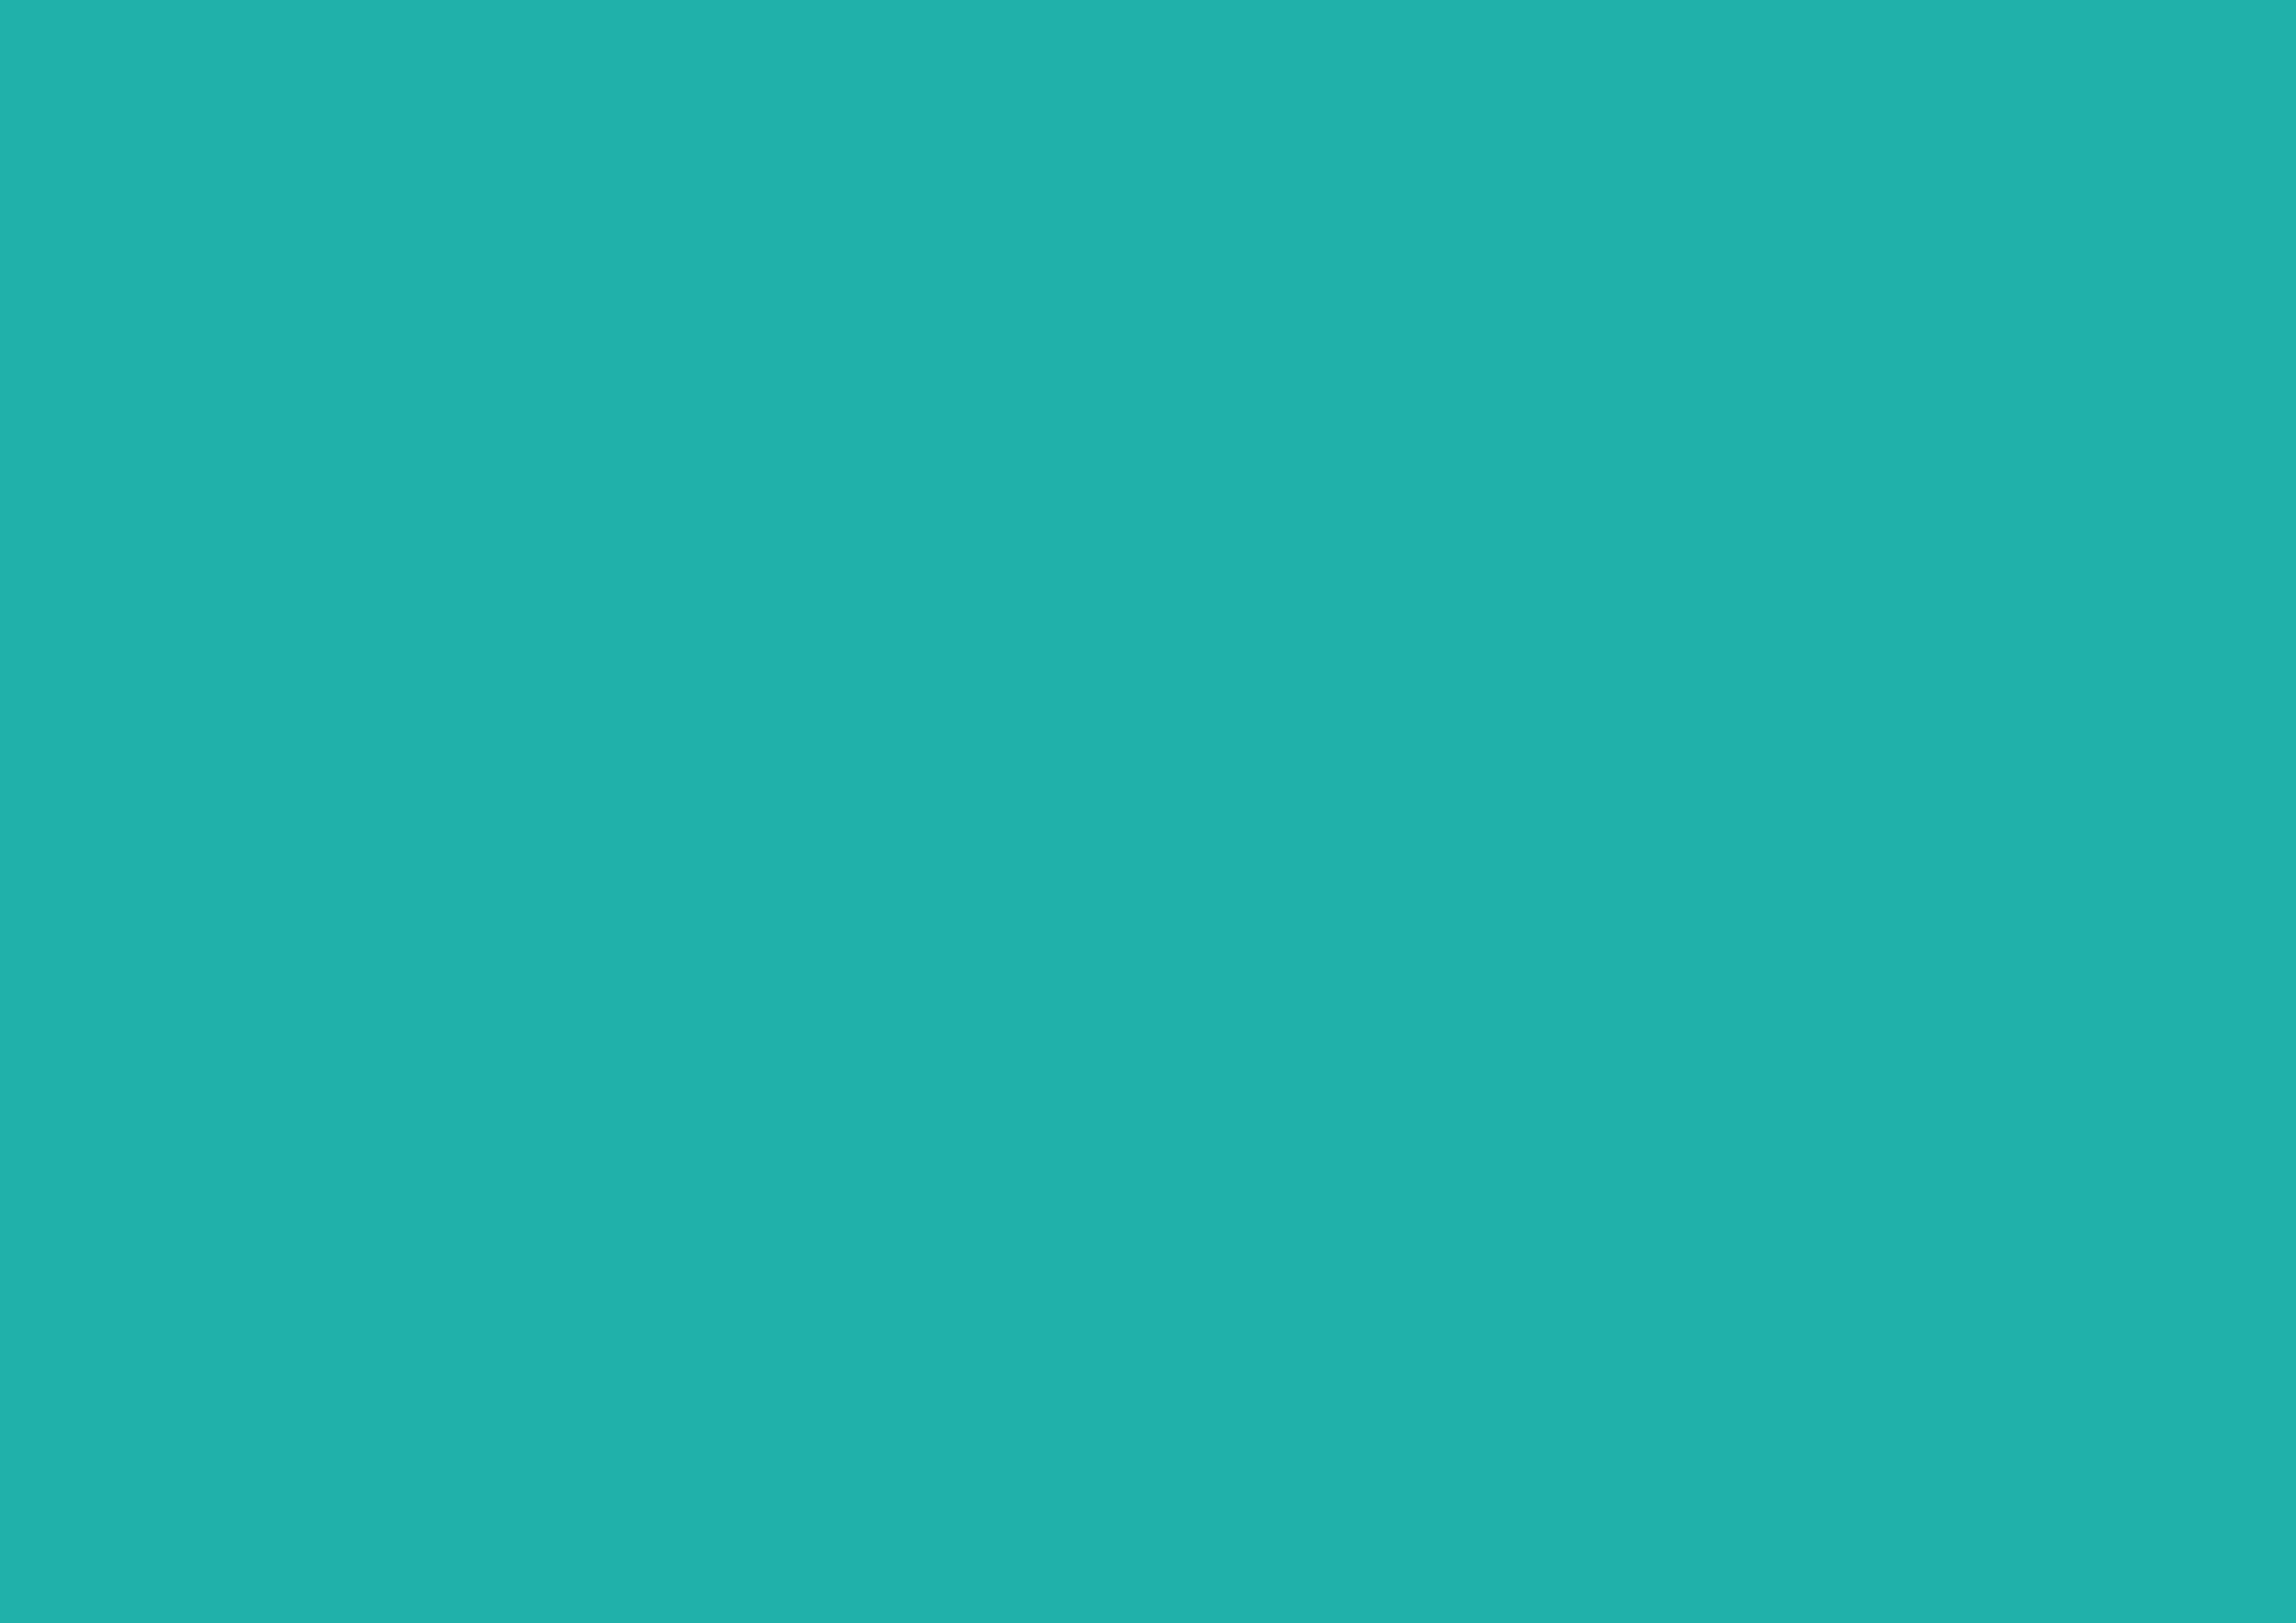 3508x2480 Light Sea Green Solid Color Background